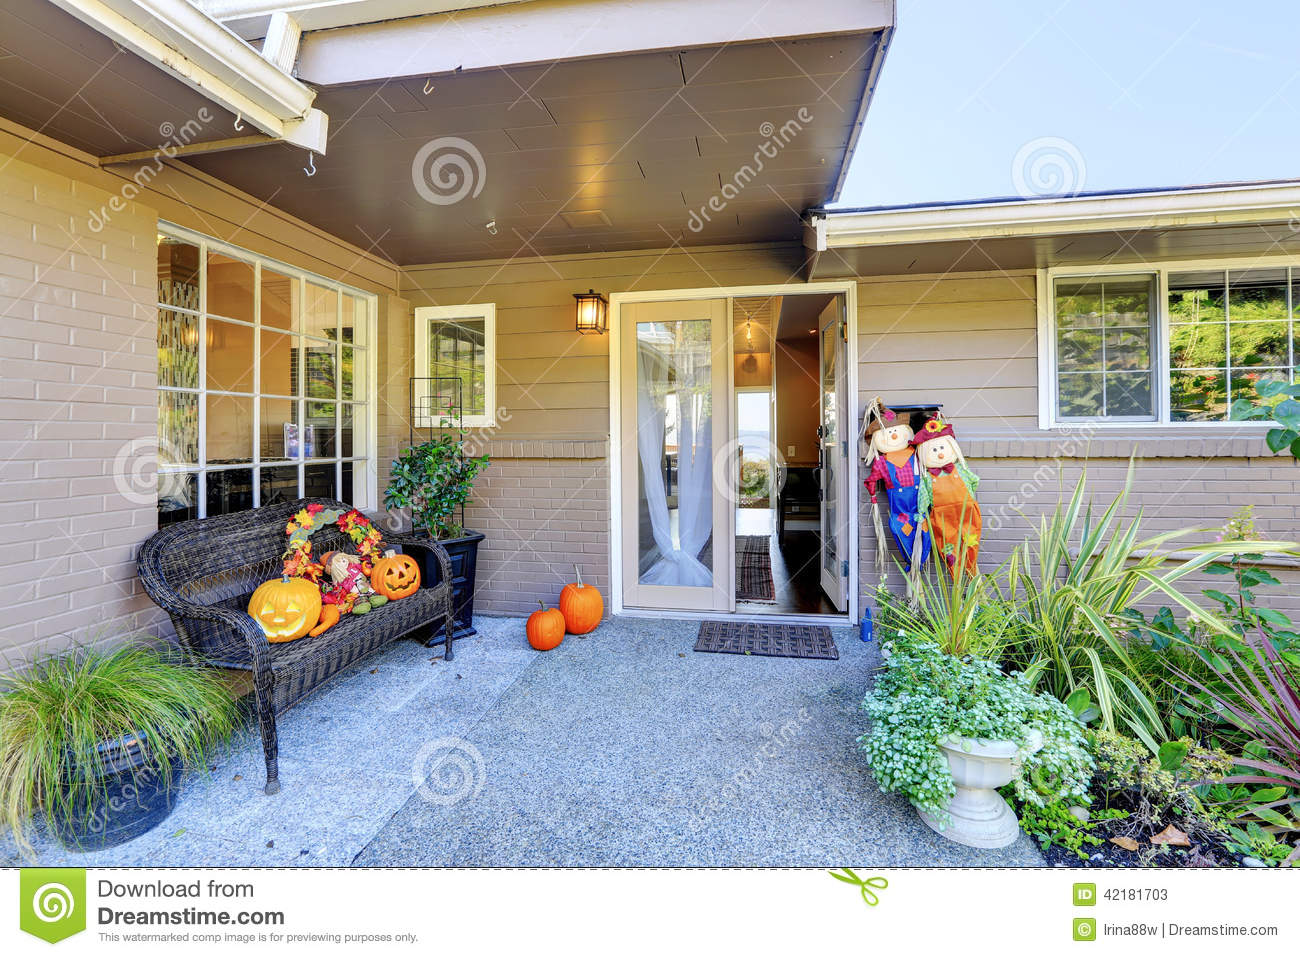 Entrance Porch With Wicker Bench Flower Pots And Pumpkin Decoration